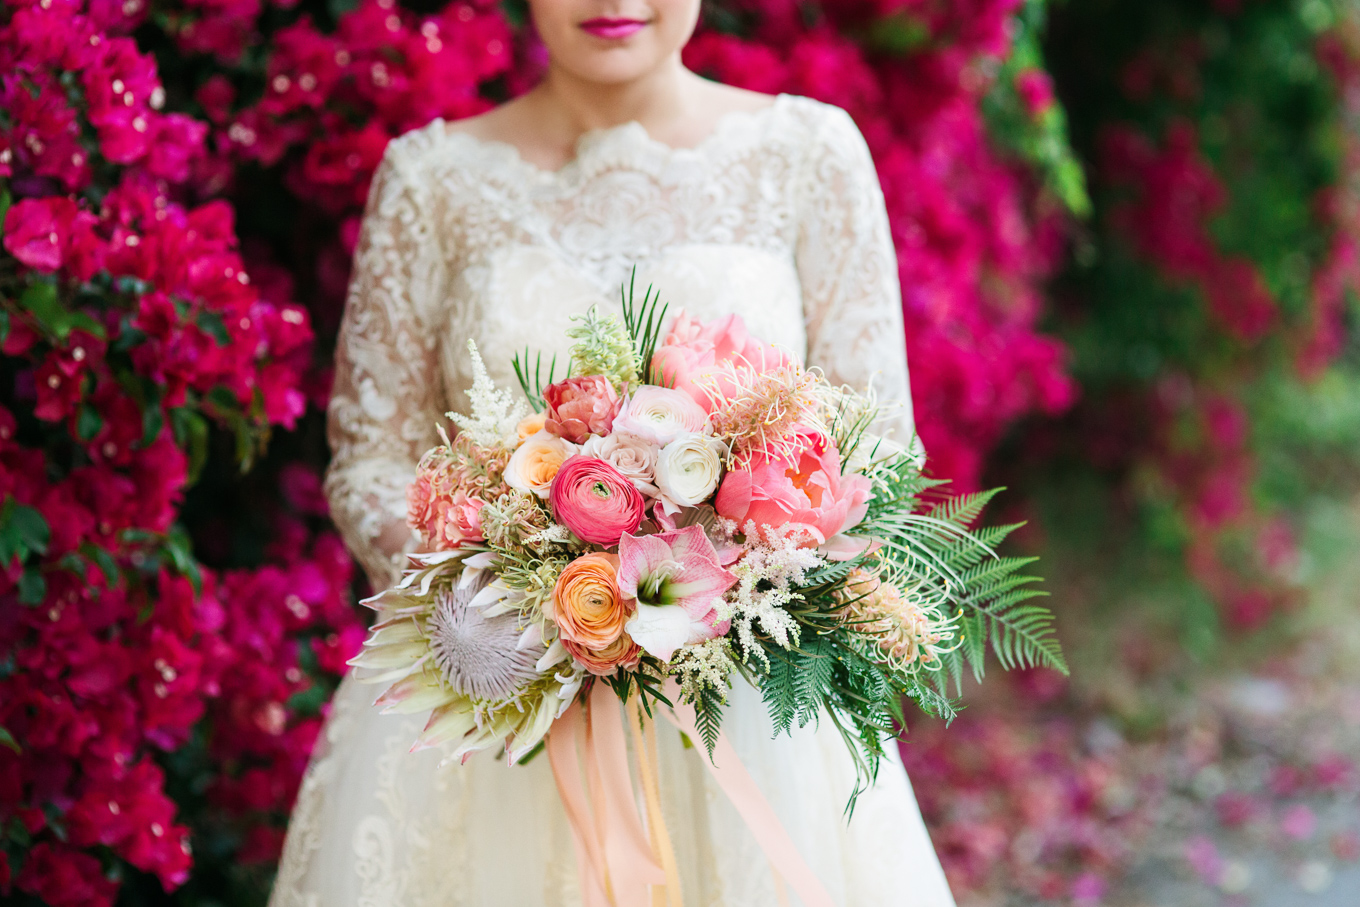 Tropical protea and pink wedding flowers | Beautiful bridal bouquet inspiration and advice | Colorful and elevated wedding photography for fun-loving couples in Southern California | #weddingflowers #weddingbouquet #bridebouquet #bouquetideas #uniquebouquet   Source: Mary Costa Photography | Los Angeles